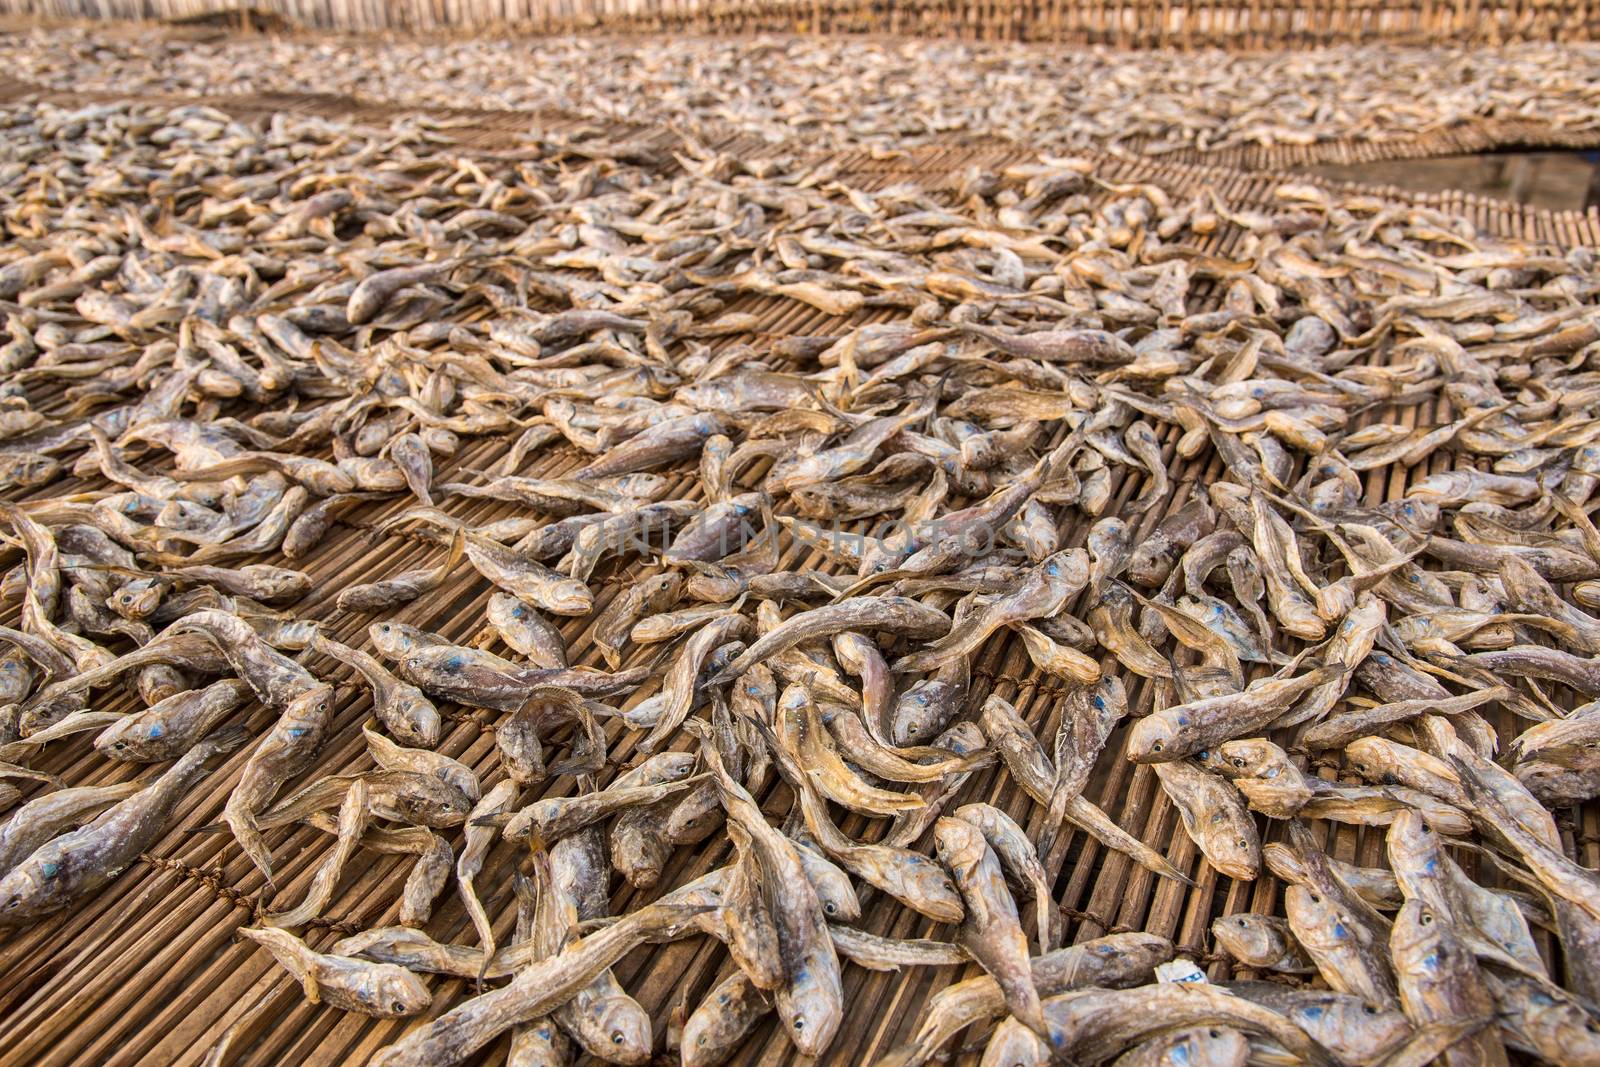 Small sea fish being dried over cane mats at a dry fish industry in Digha, West Bengal, India